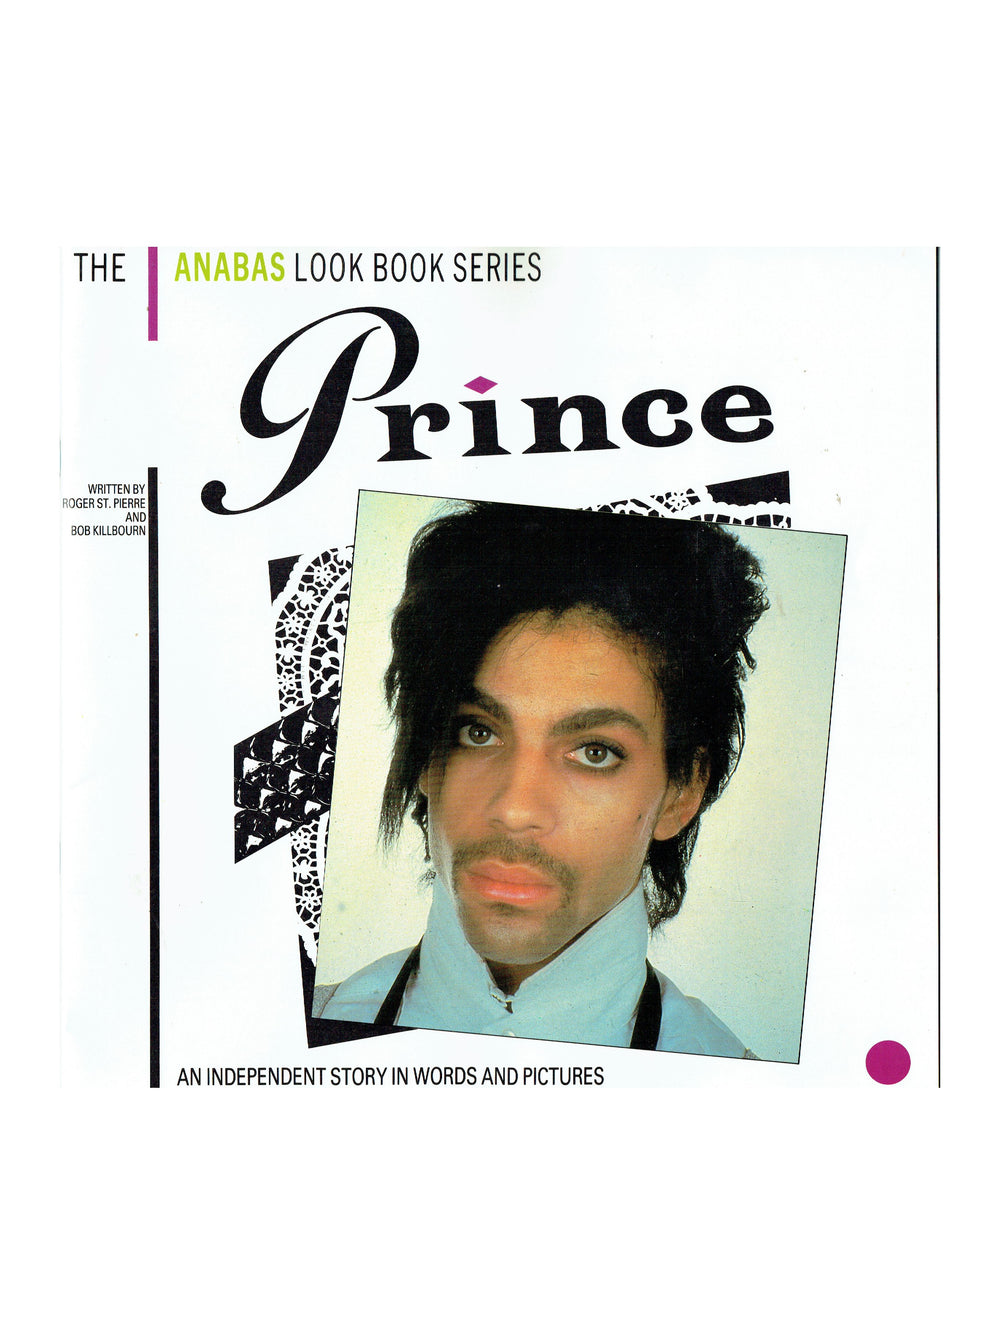 Prince Anabas Soft Backed Book 12 x 12 1984 UK Publication